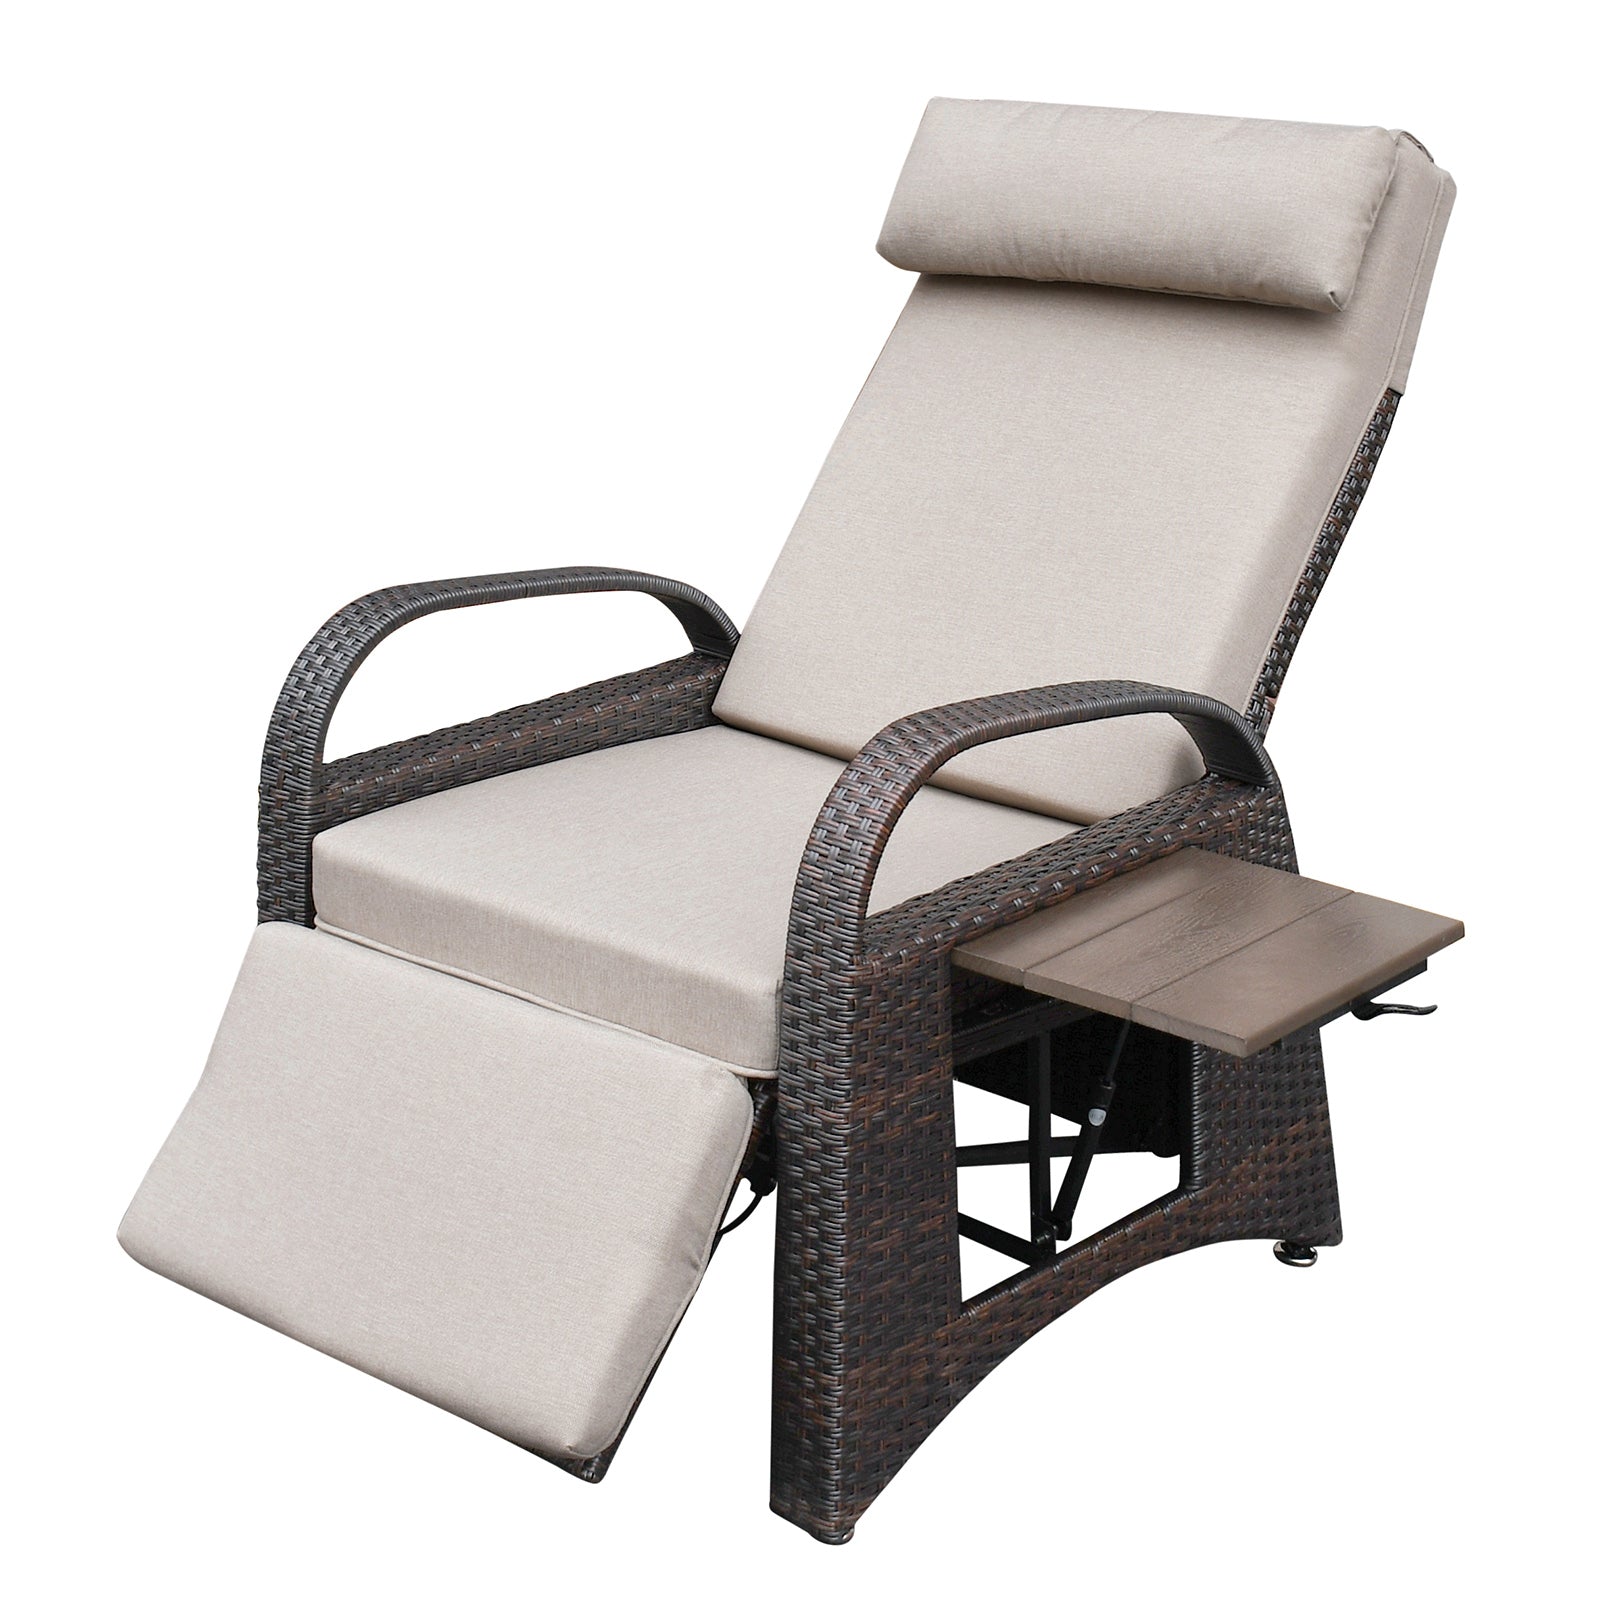 ZNTS Outdoor Recliner Chair,PE Wicker Adjustable Reclining Lounge Chair and Removable Soft Cushion, with W1889107782